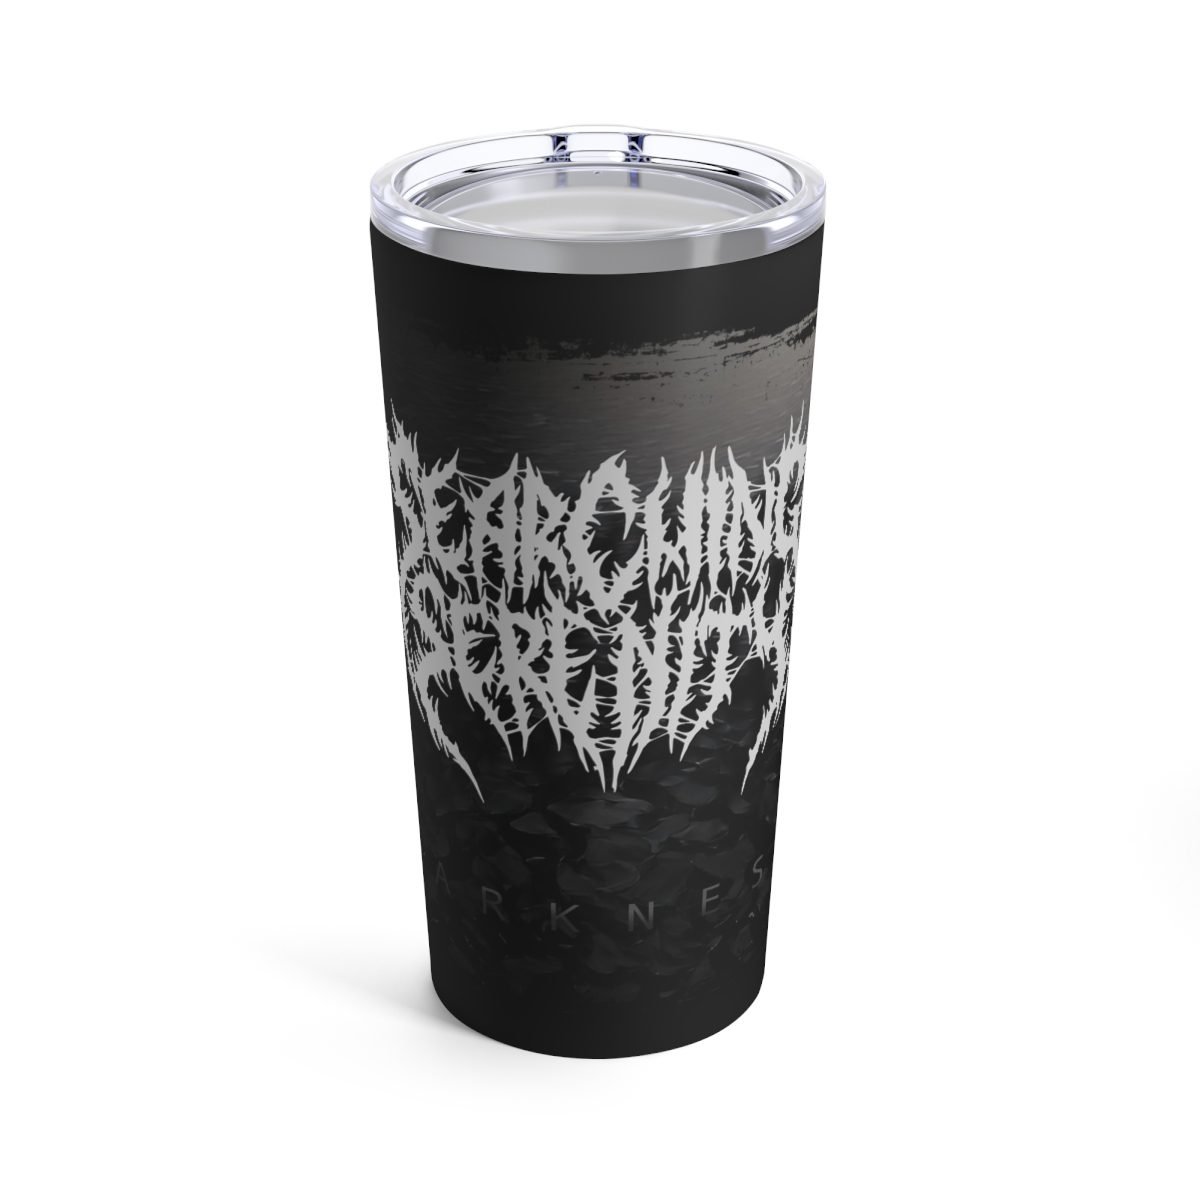 Searching Serenity – Darkness 20oz White Stainless Steel Tumbler